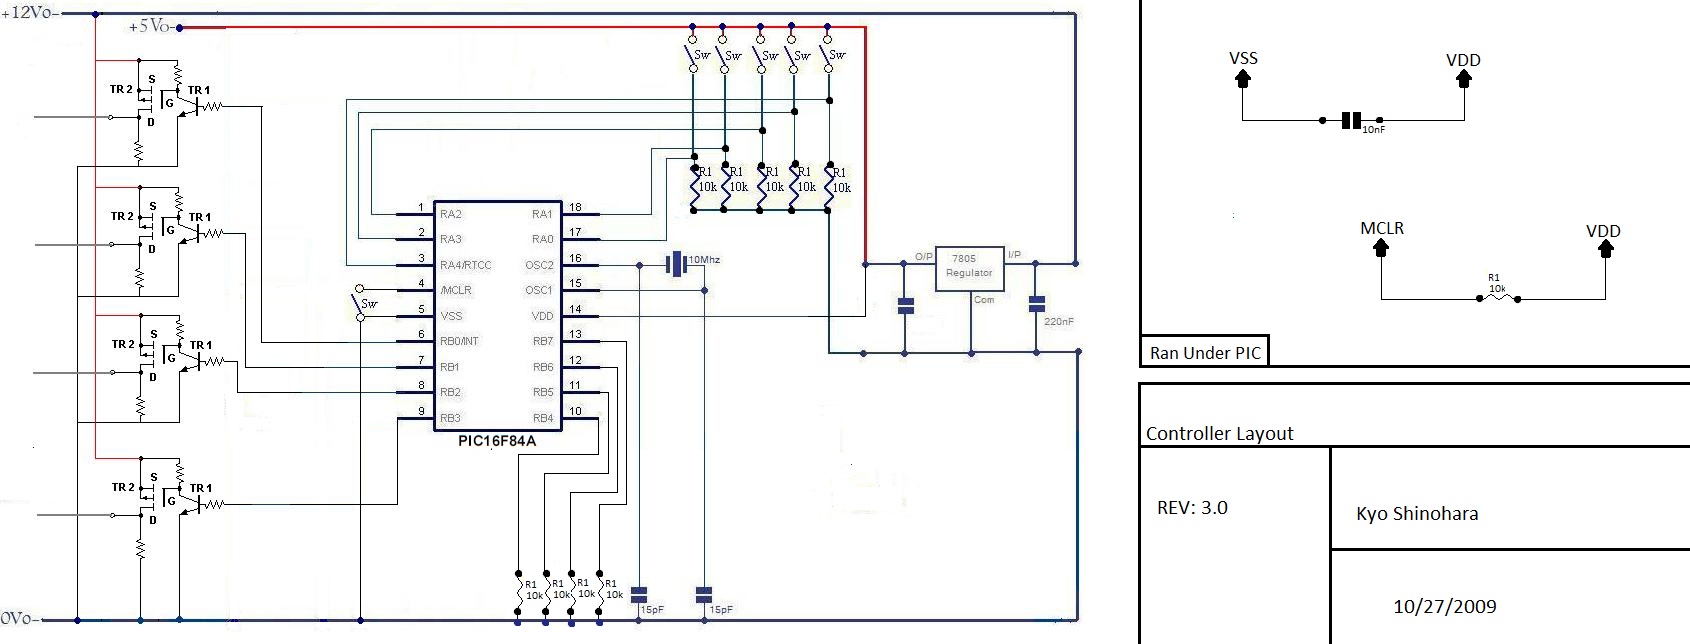 forum.best-microcontroller-projects.com â€¢ View topic - Idea found ...